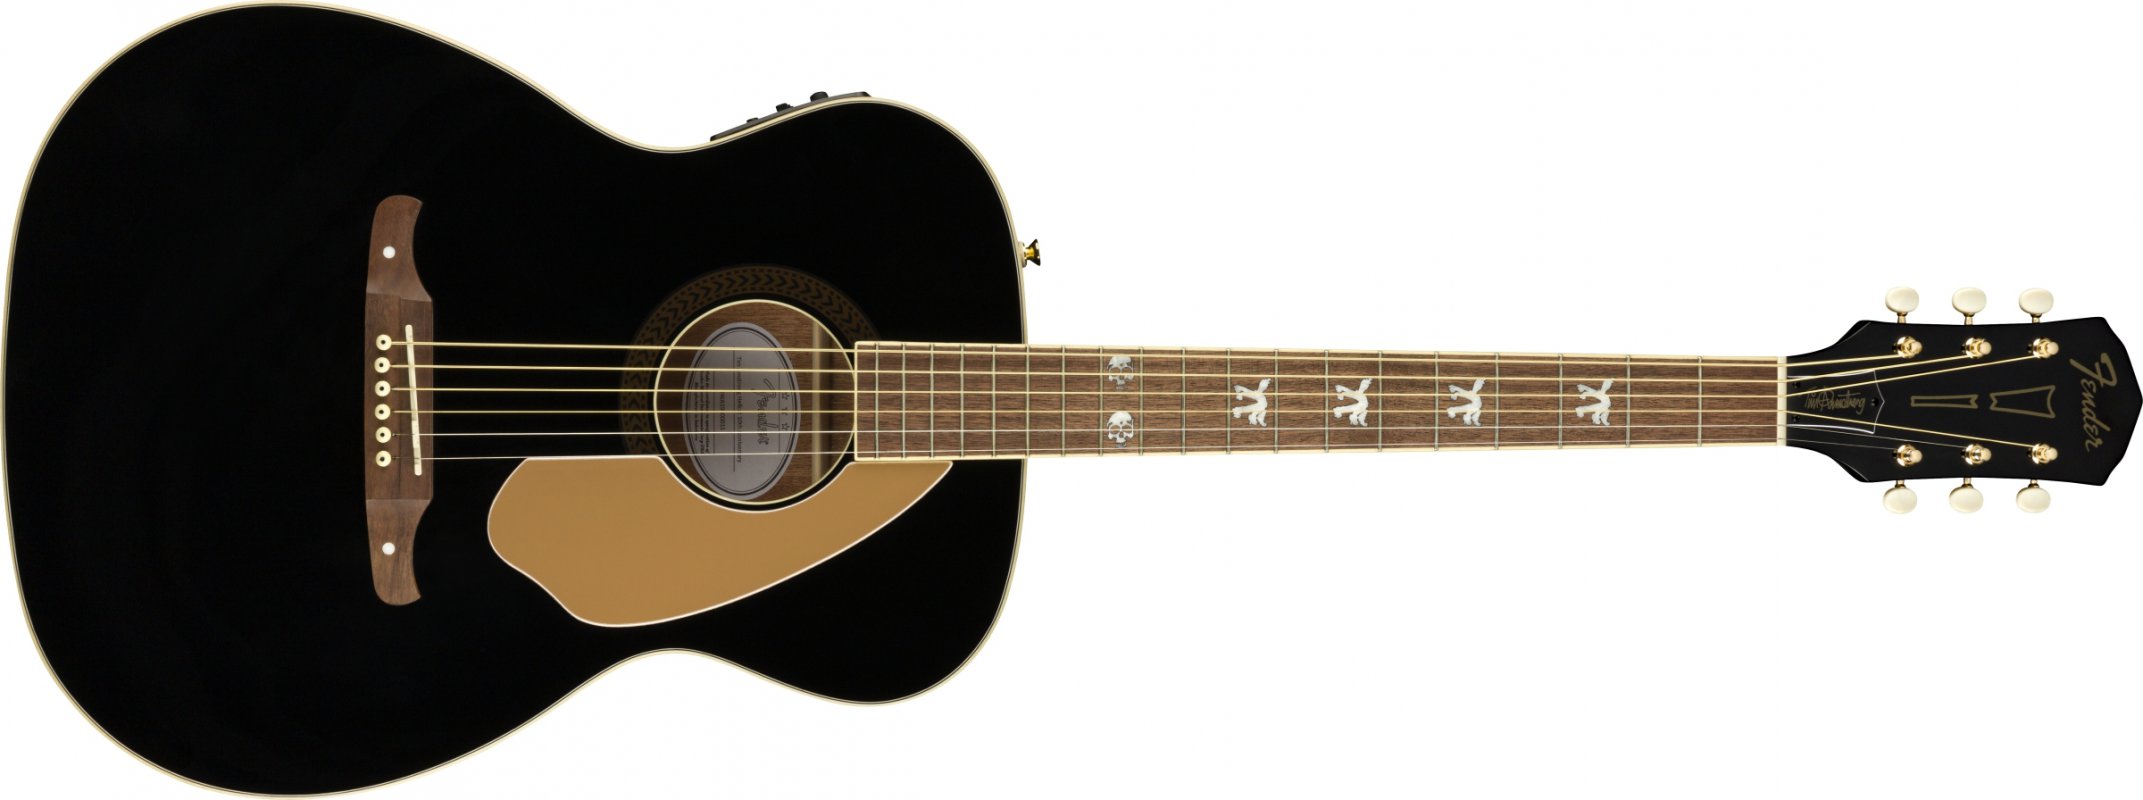 Mer information om "Fender & Tim Armstrong celebrate 10 years with Anniversary Hellcat"